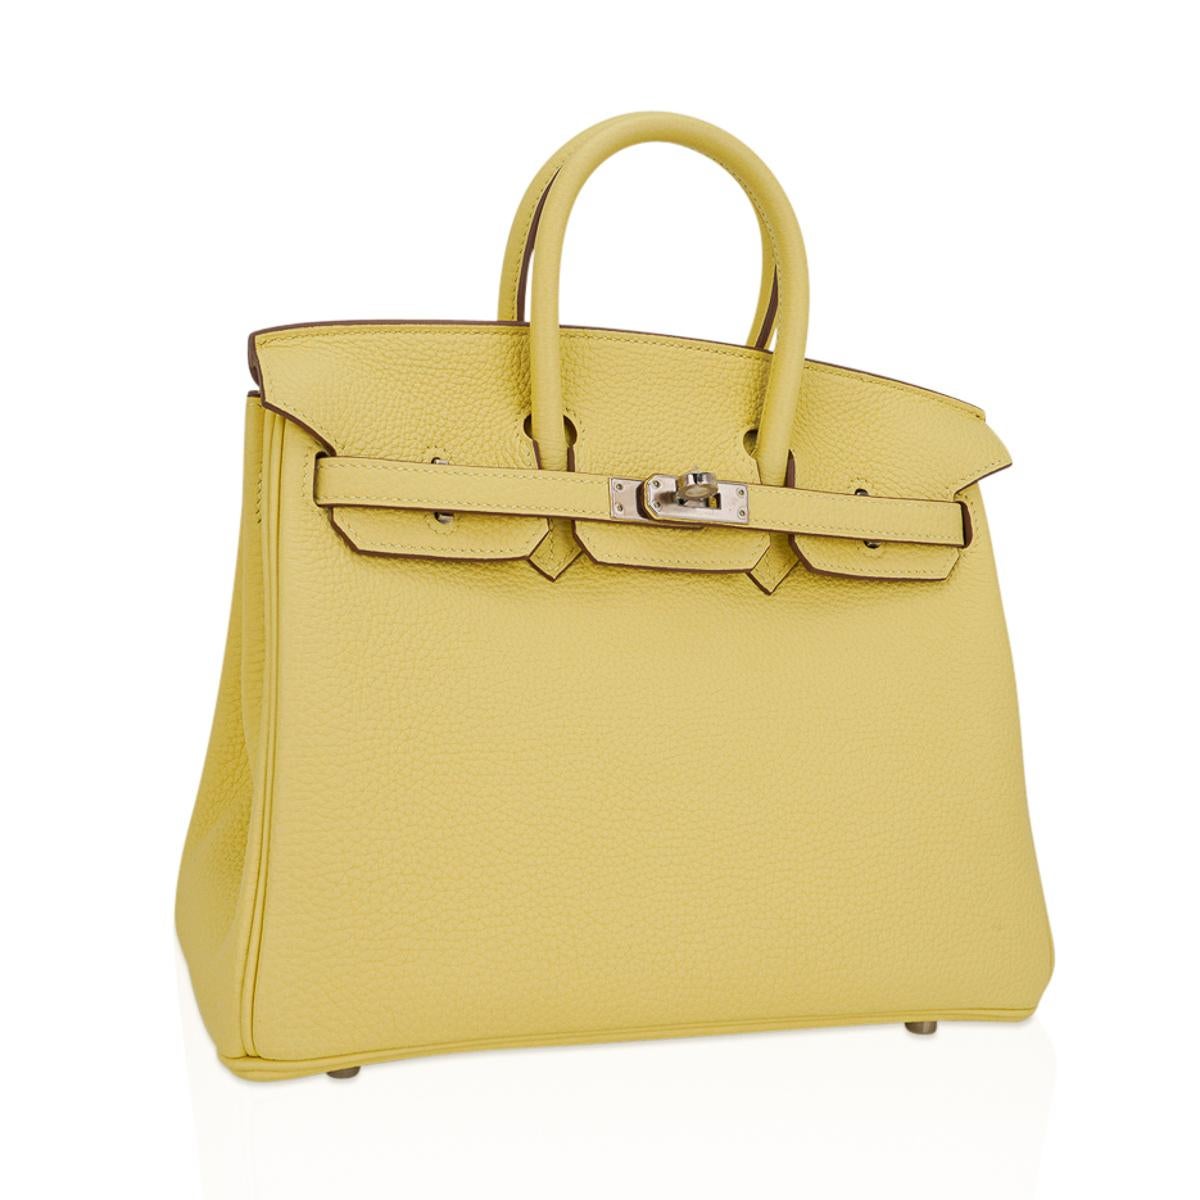 Mightychic offers an  Hermes Birkin 25 bag featured in gorgeous Jaune Poussin.
Togo leather with fresh palladium hardware.
This gentle pale yellow is lovely twist on a neutral Hermes Birkin bag.
Comes with lock, keys, clochette, sleepers, raincoat,